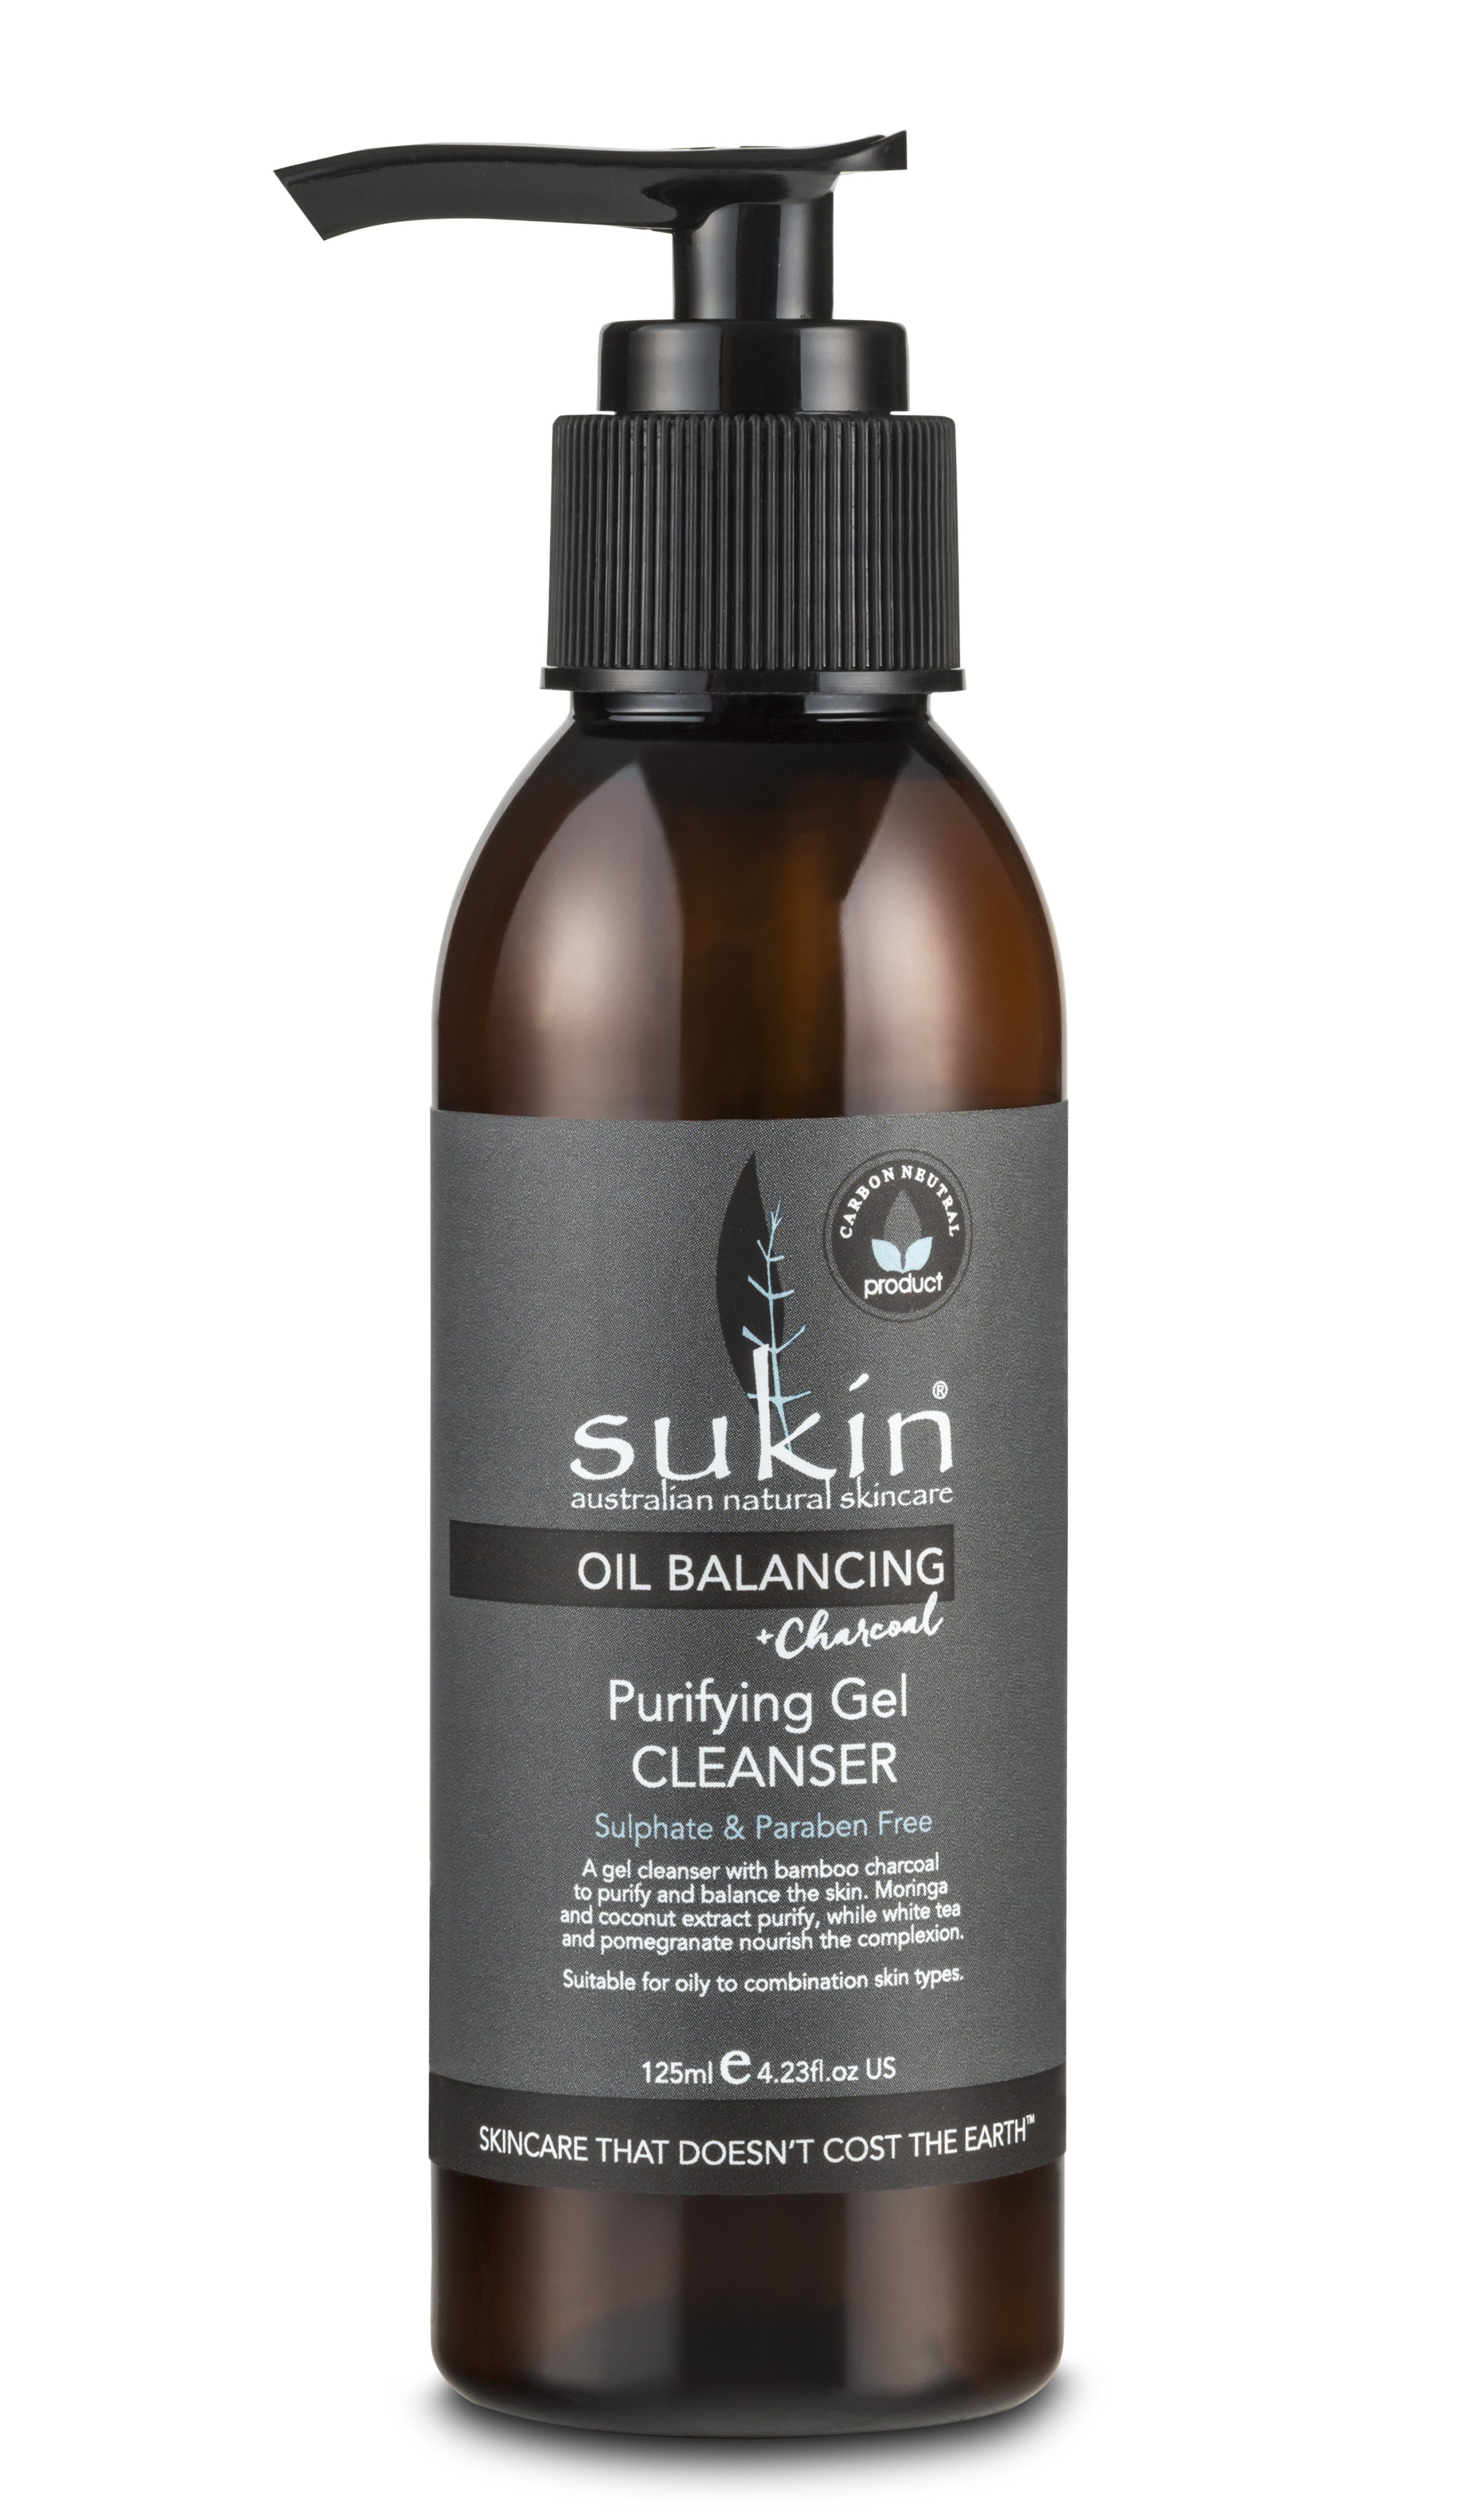 Oil Balancing Purifying Gel Cleans